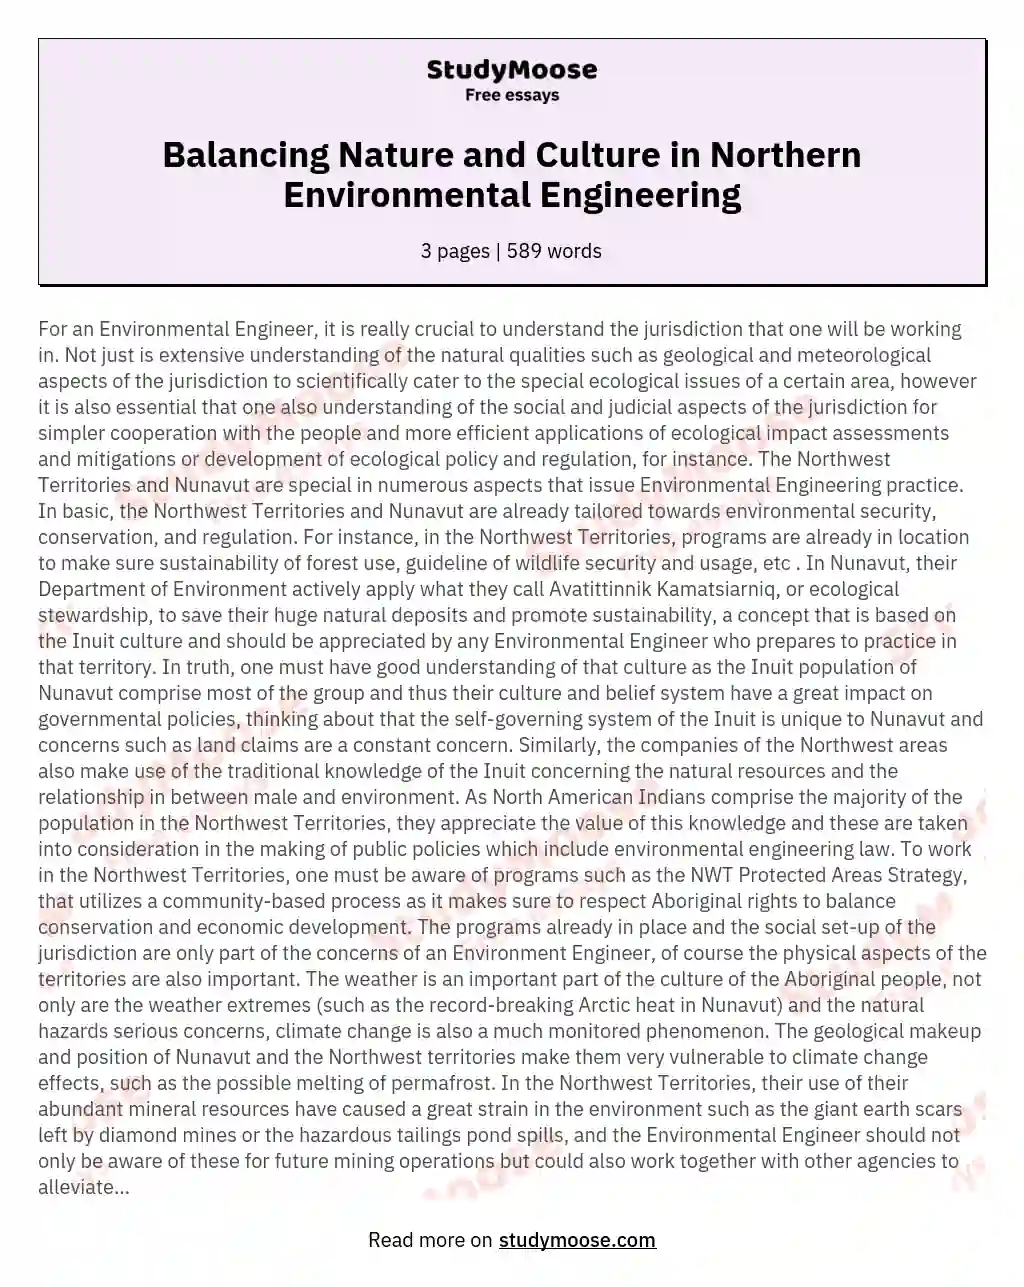 Balancing Nature and Culture in Northern Environmental Engineering essay